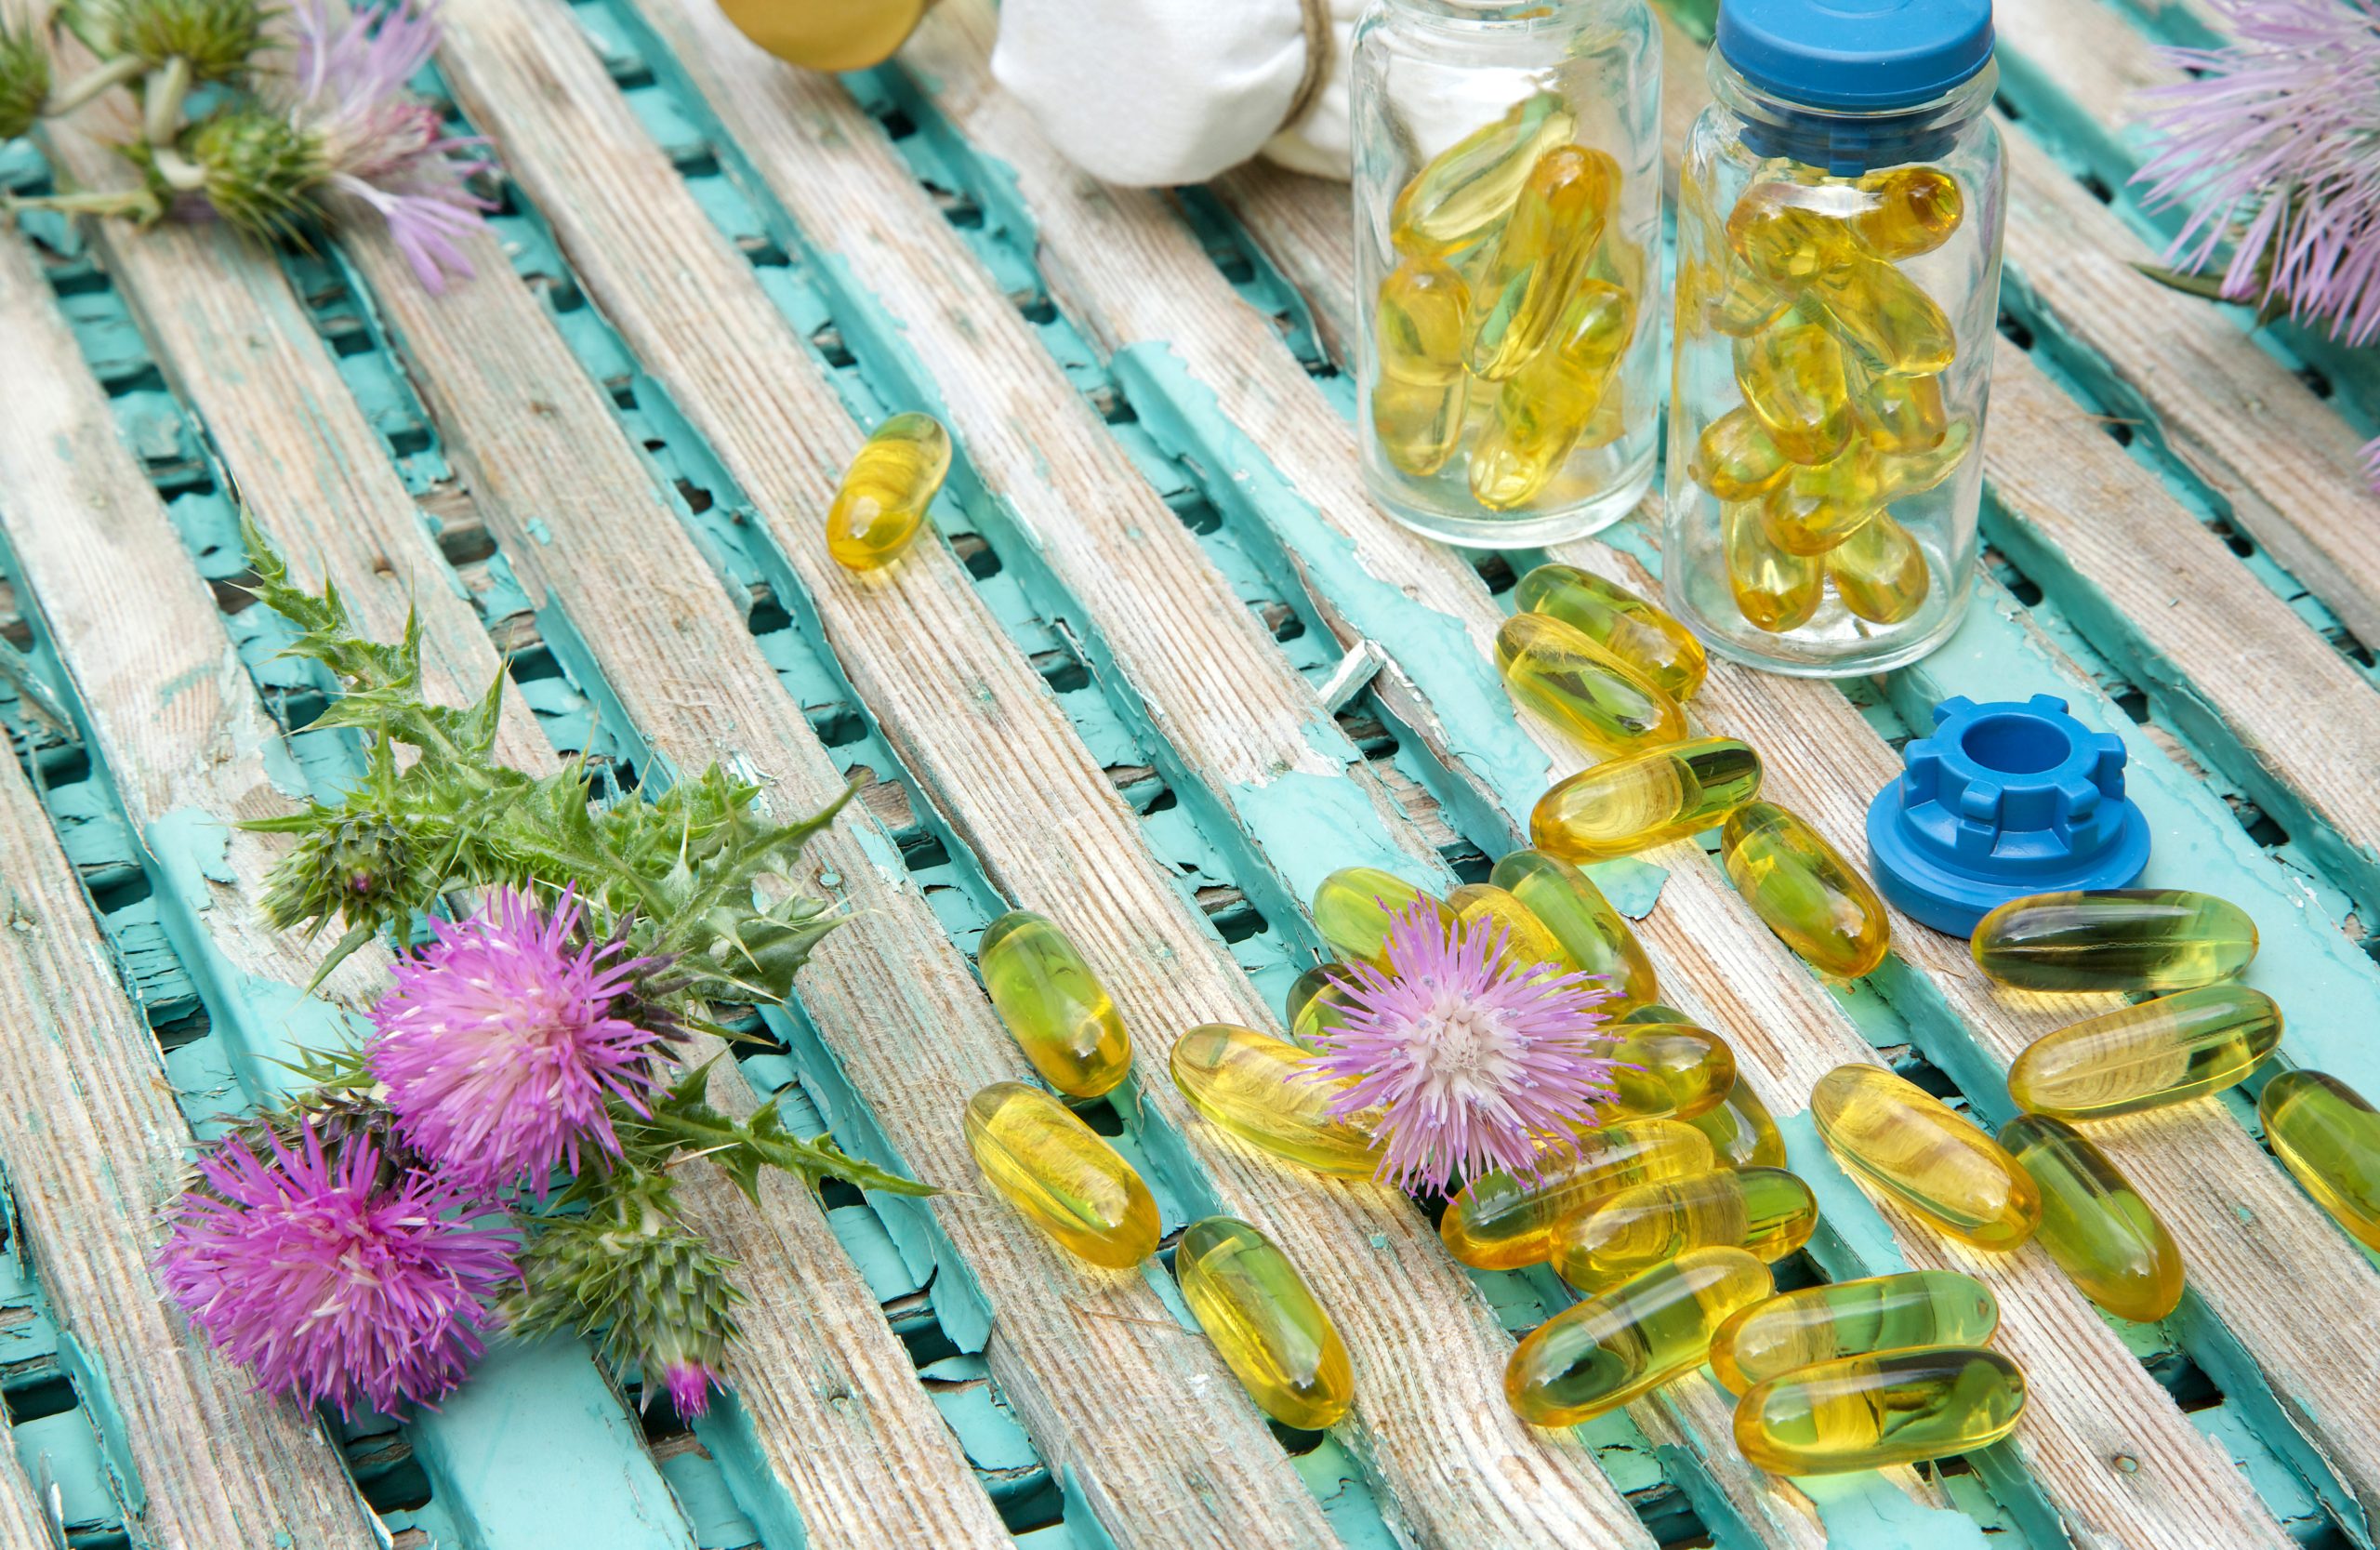 MILK THISTLE OIL IN SOFTGELS AND MILK THISTLE BLOSSOMS IN THE BACKGROUND